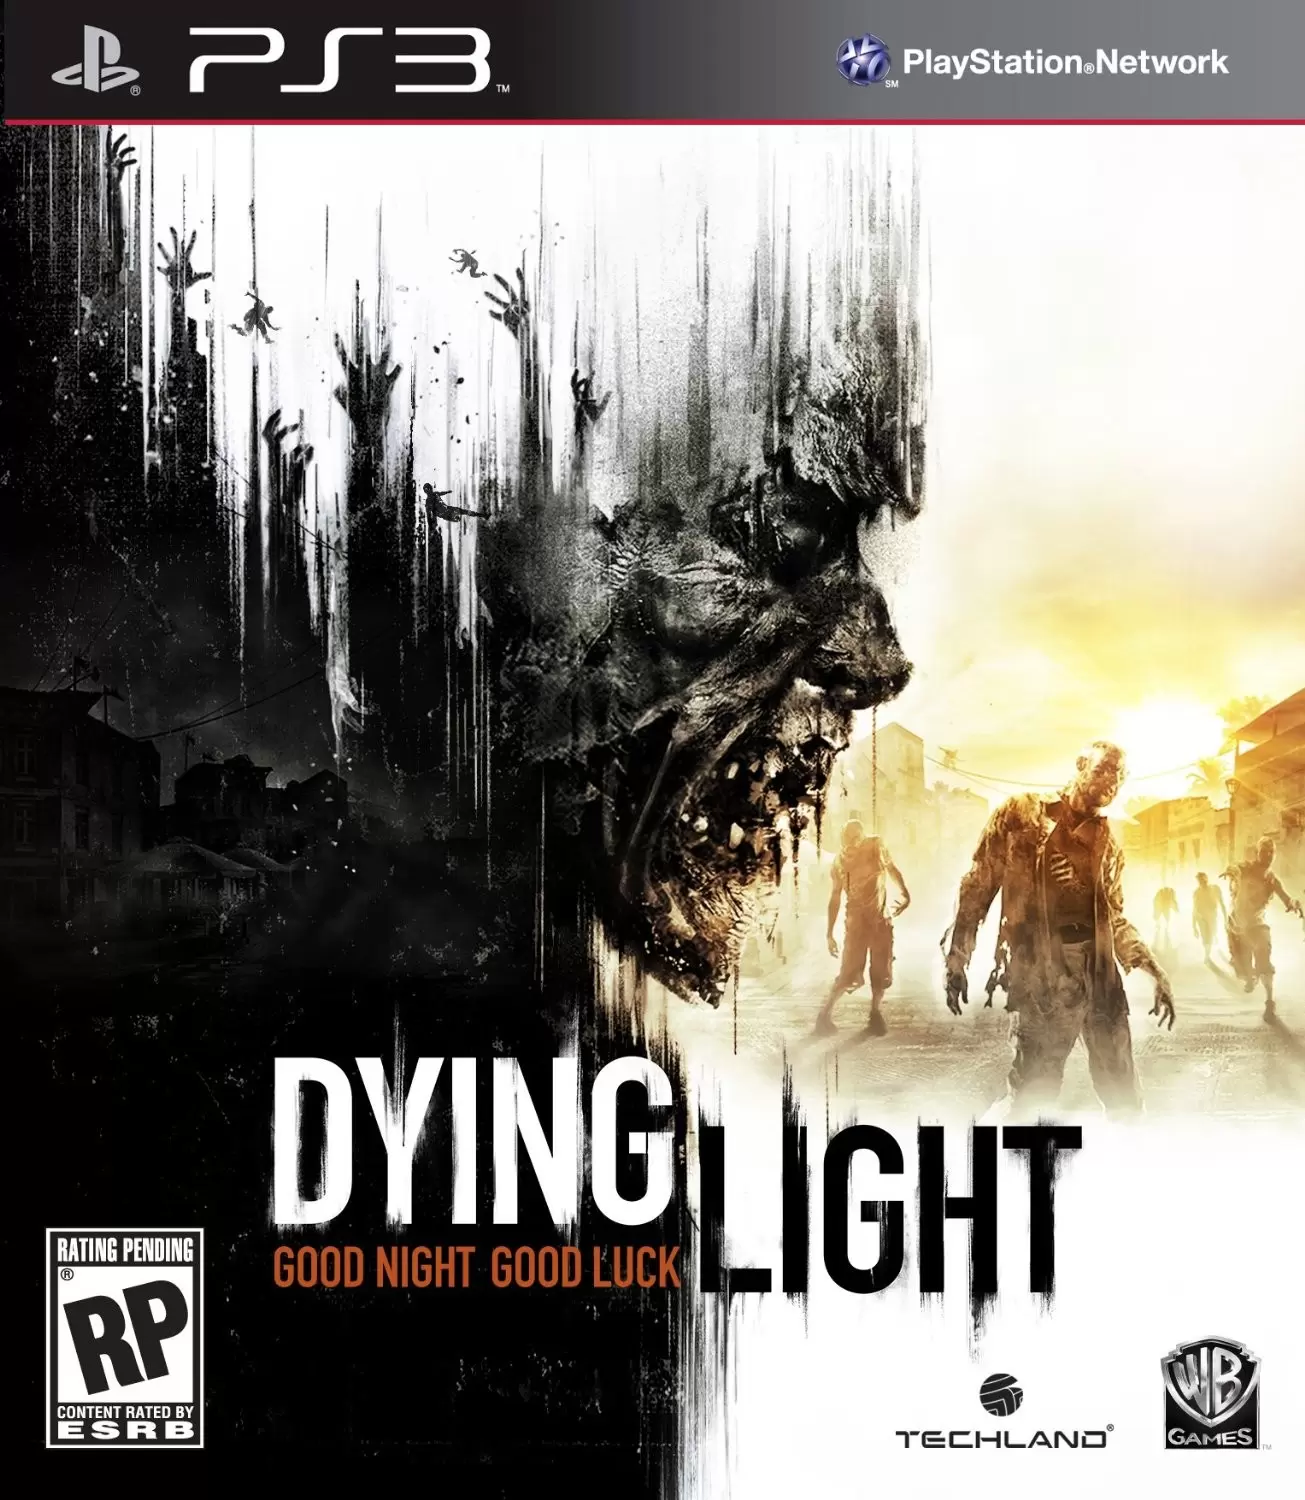 PS3 Games - Dying Light